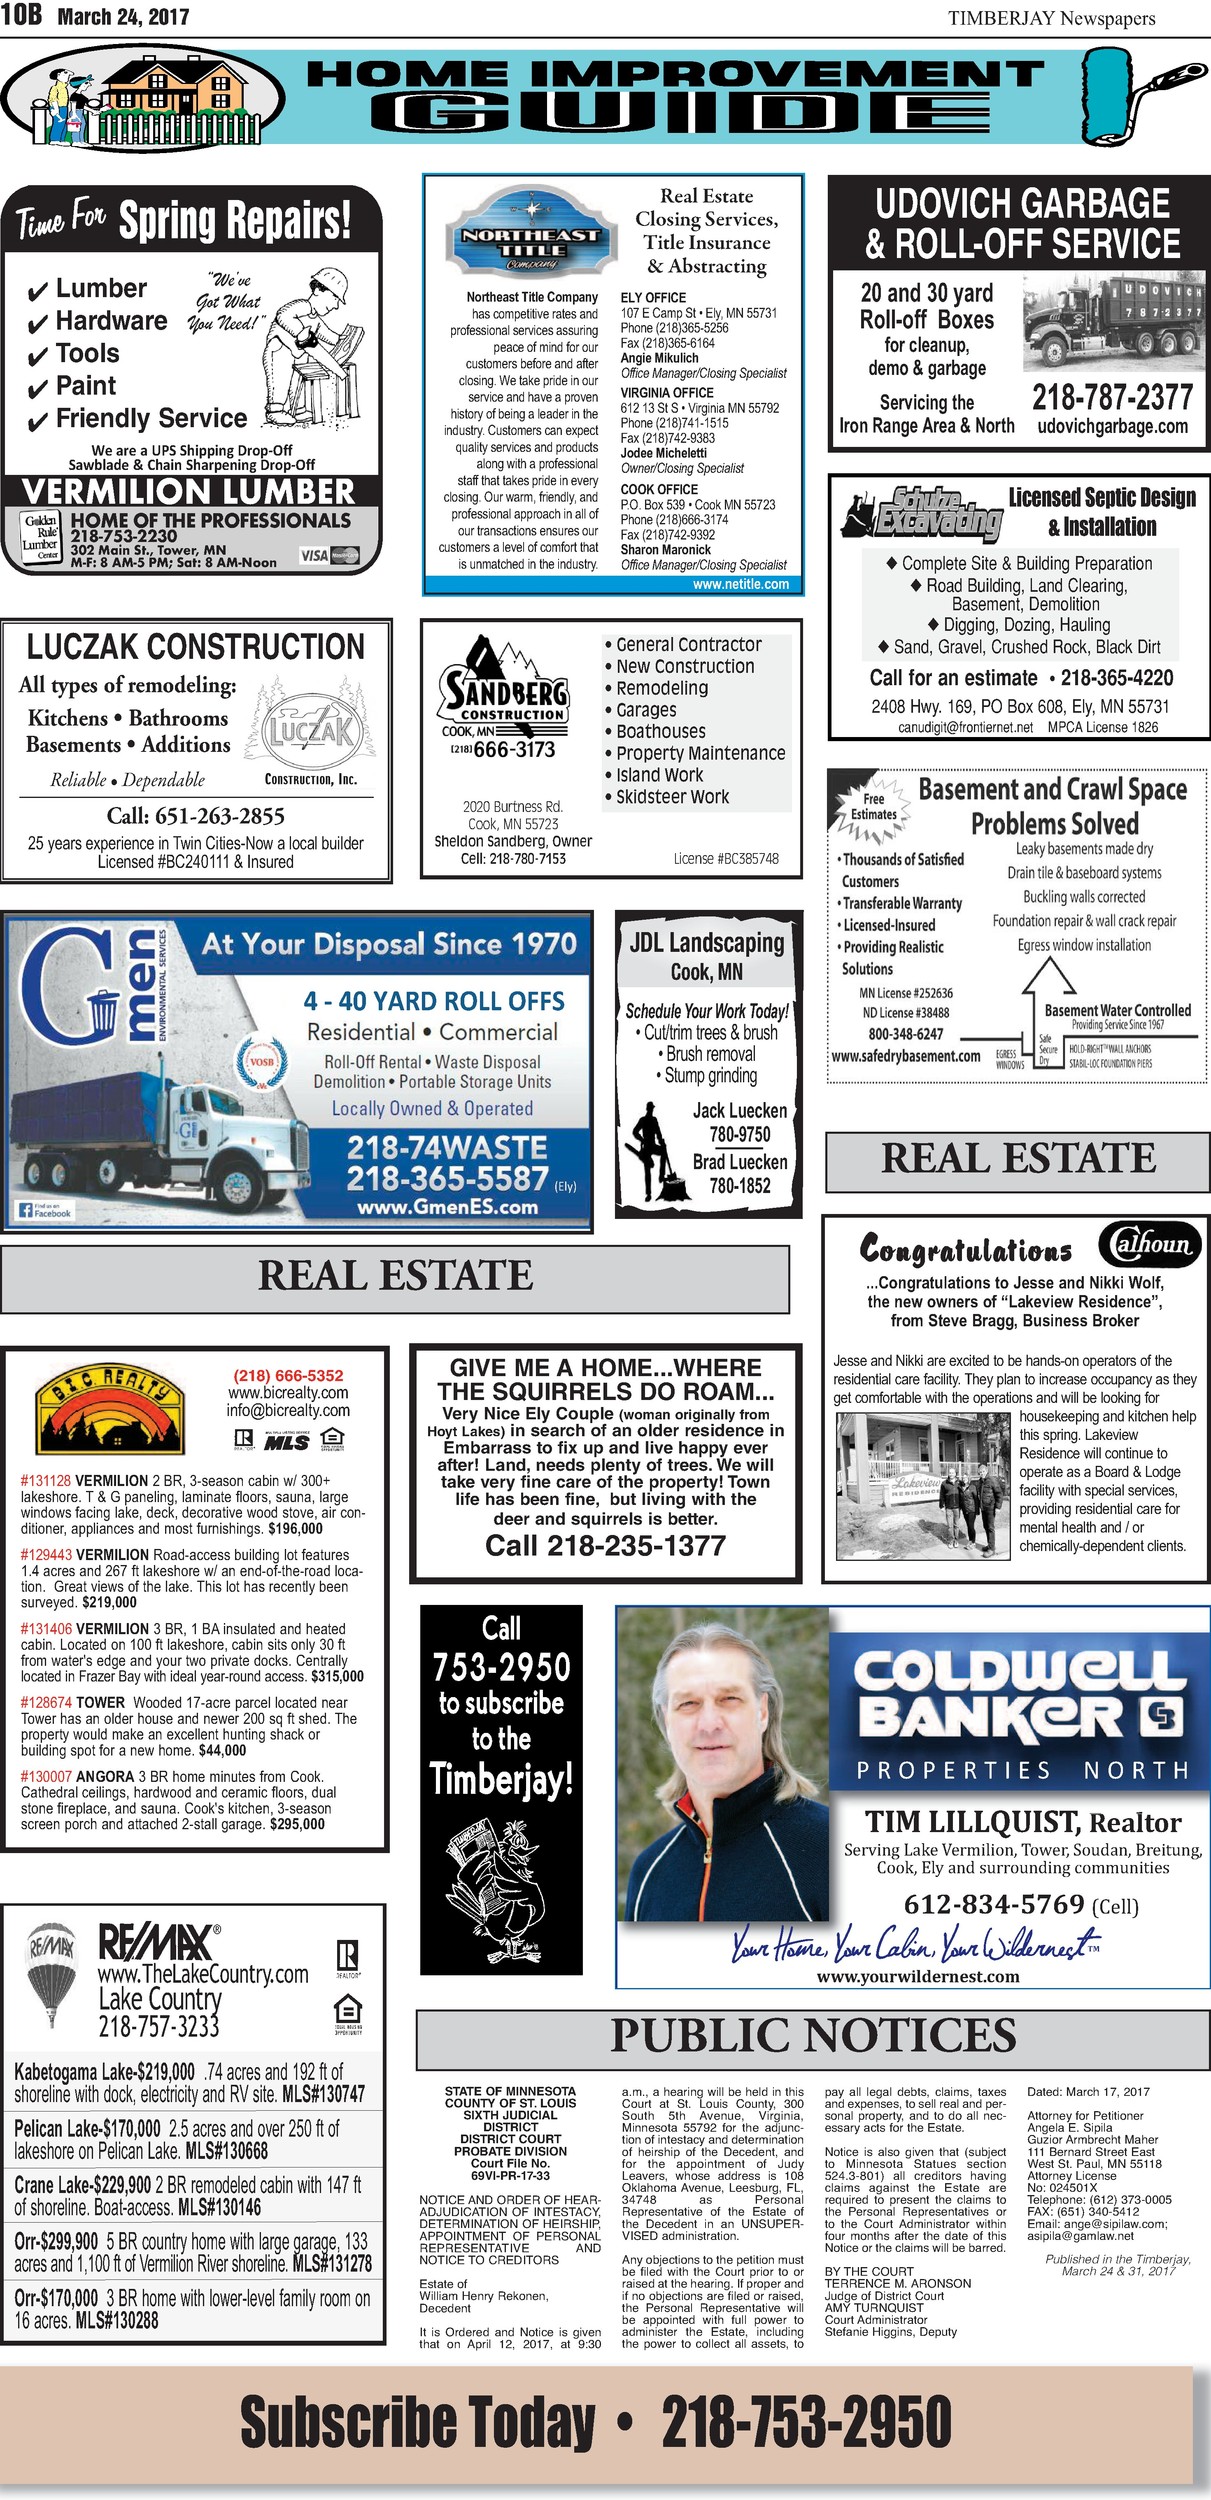 Click here to view the legal notices and classifieds on page 10B